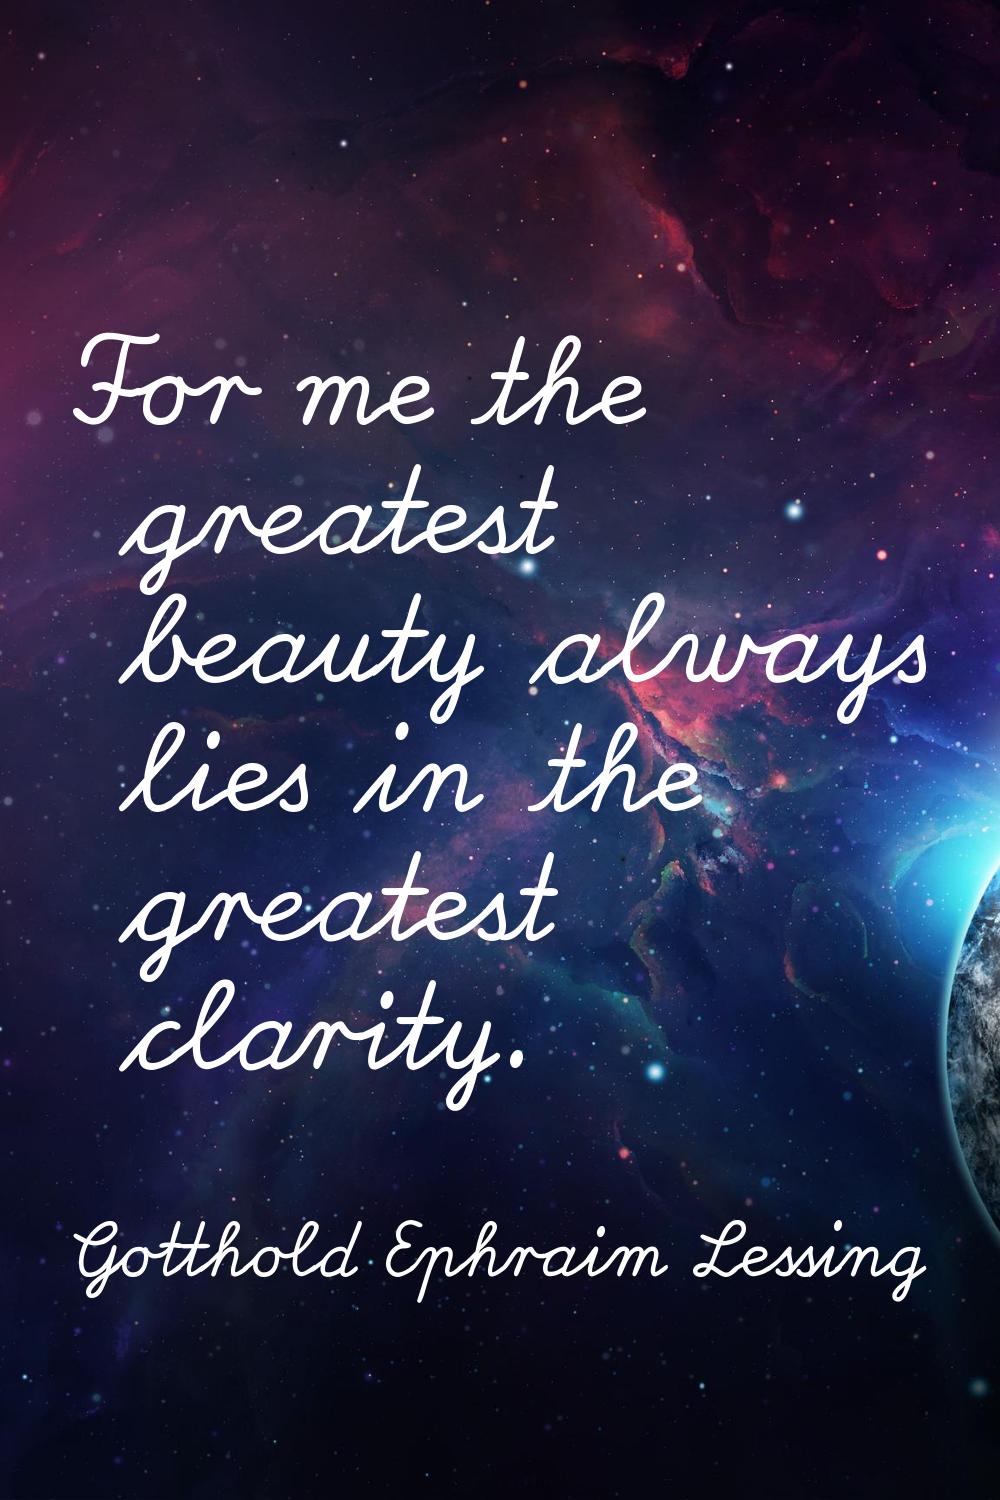 For me the greatest beauty always lies in the greatest clarity.